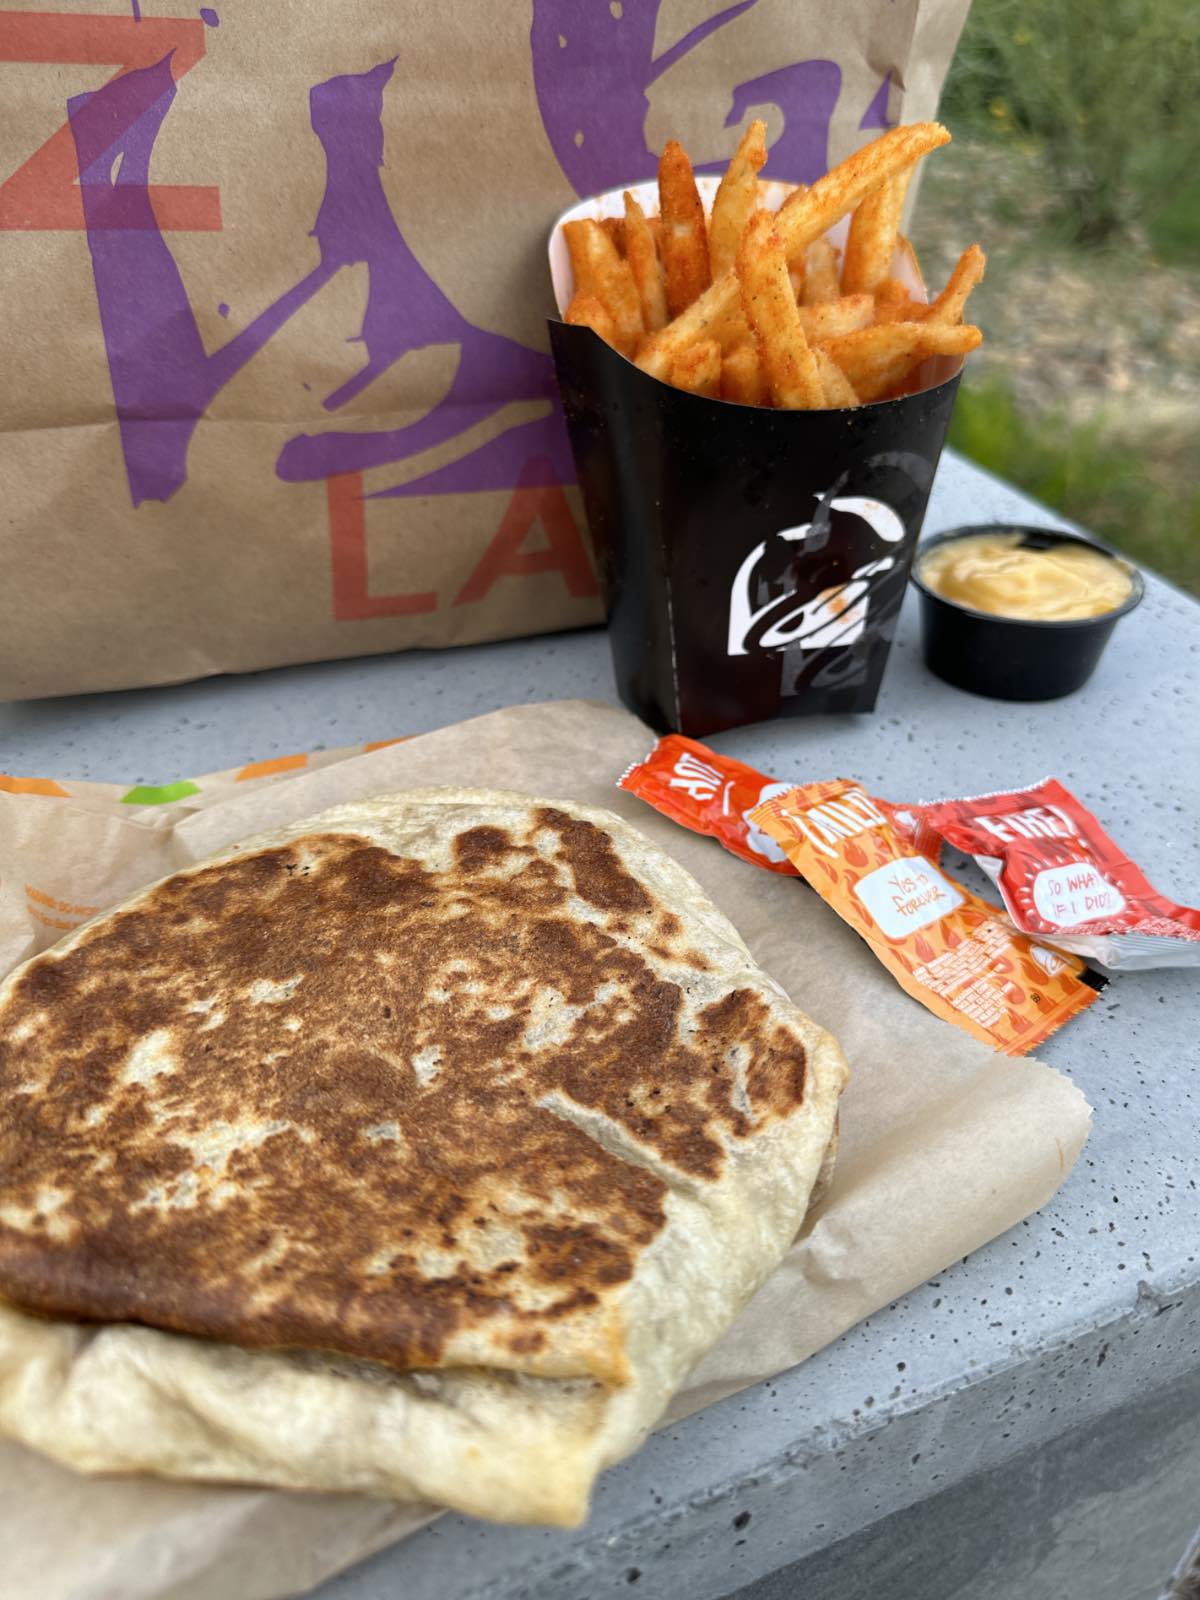 A vegan order from Taco Bell with a crunch wrap supreme and nacho cheese fries